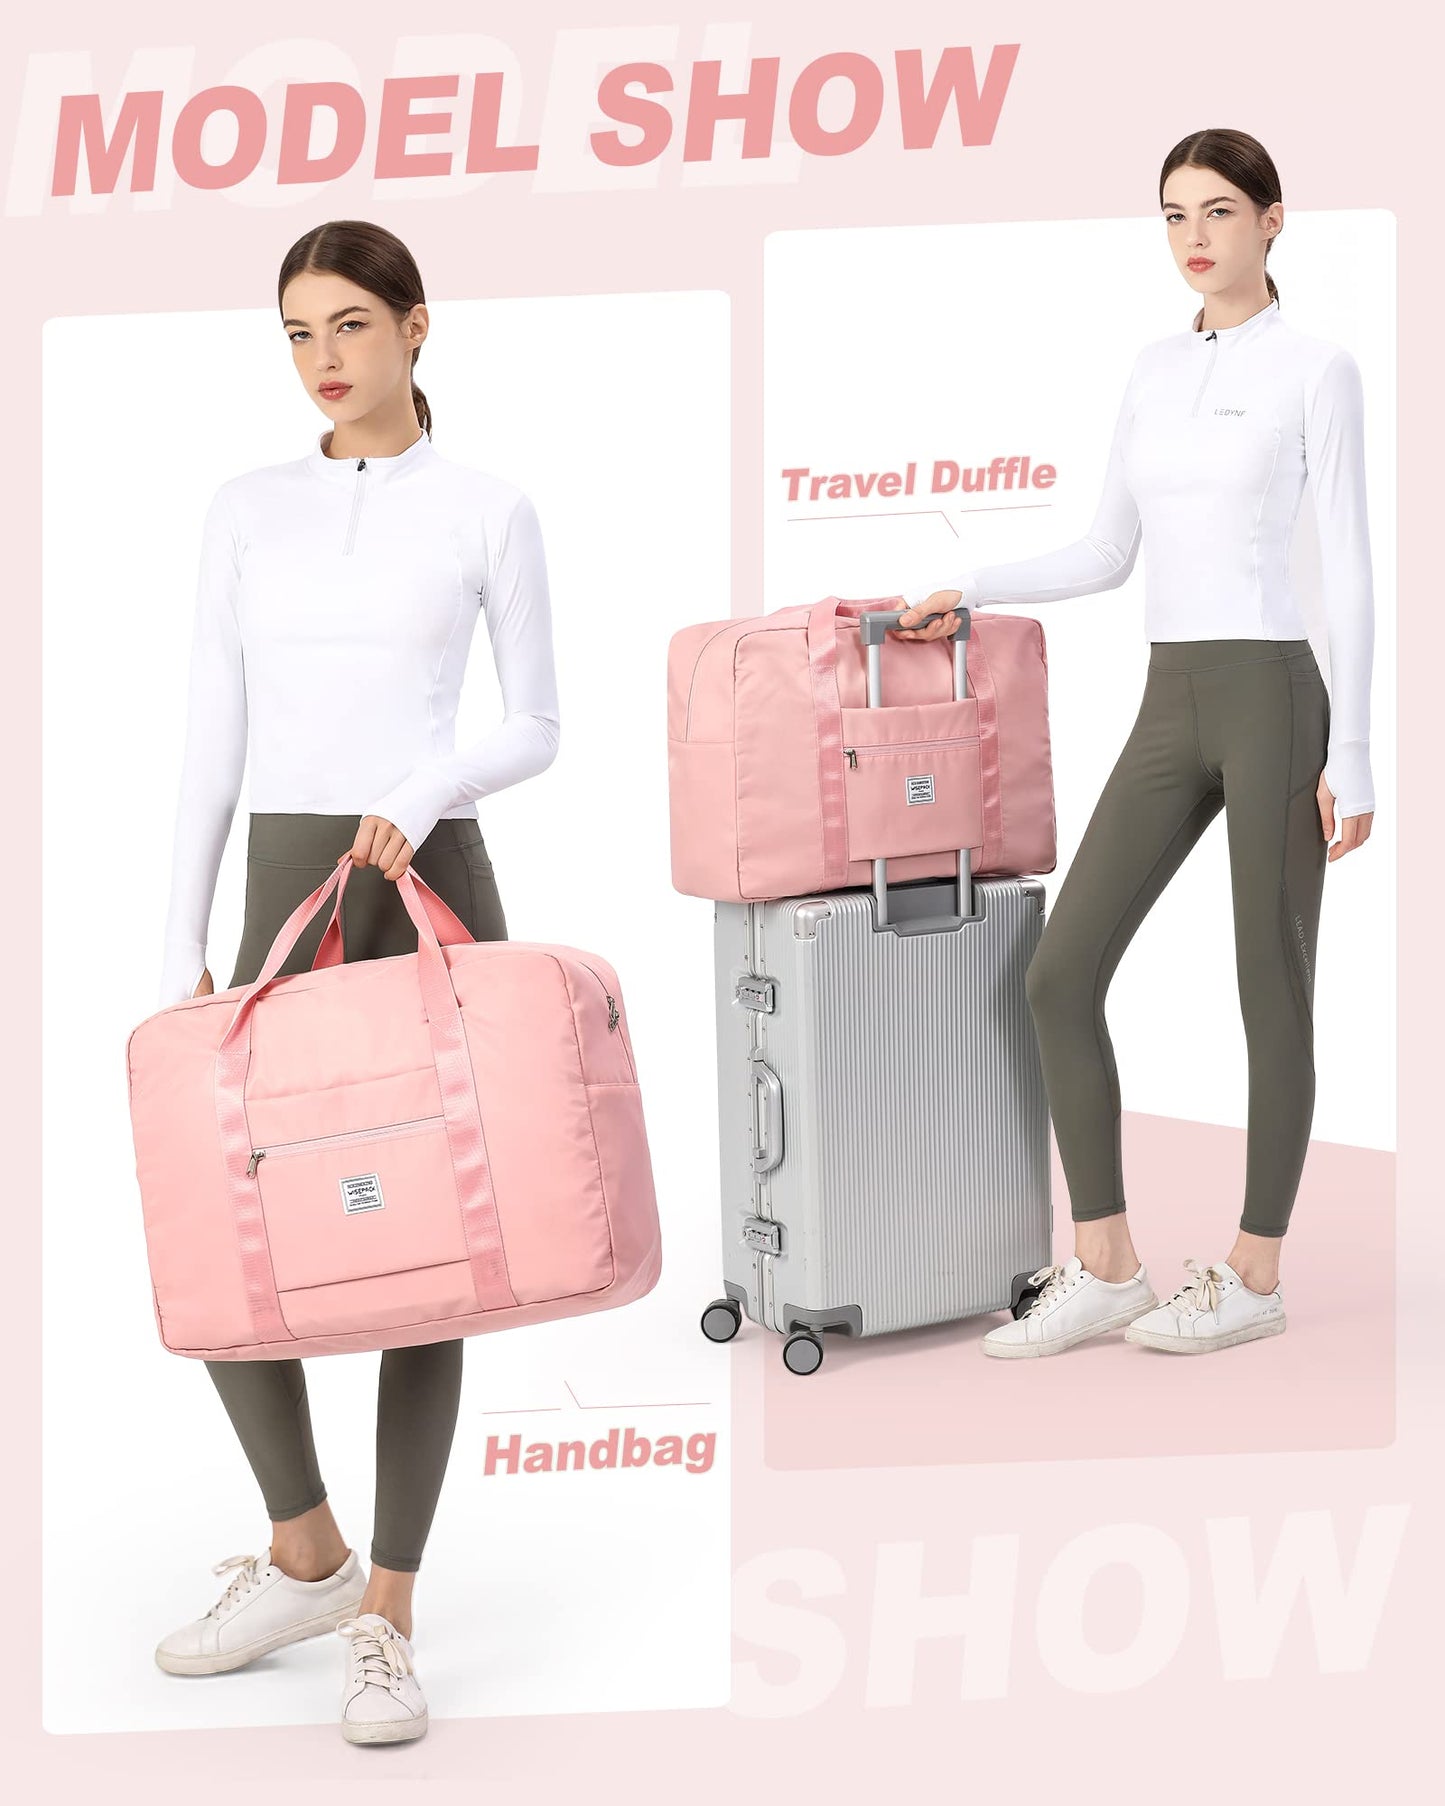 Travel Tote Bag for Women Mens,Foldable Carry on Bag for Airplanes Overnight Bags Travel Bags for Women Weekender Duffle Bag Carry on Luggage with Trolley Sleeve Pink, B7-Pink, L, Sports, Fitness,